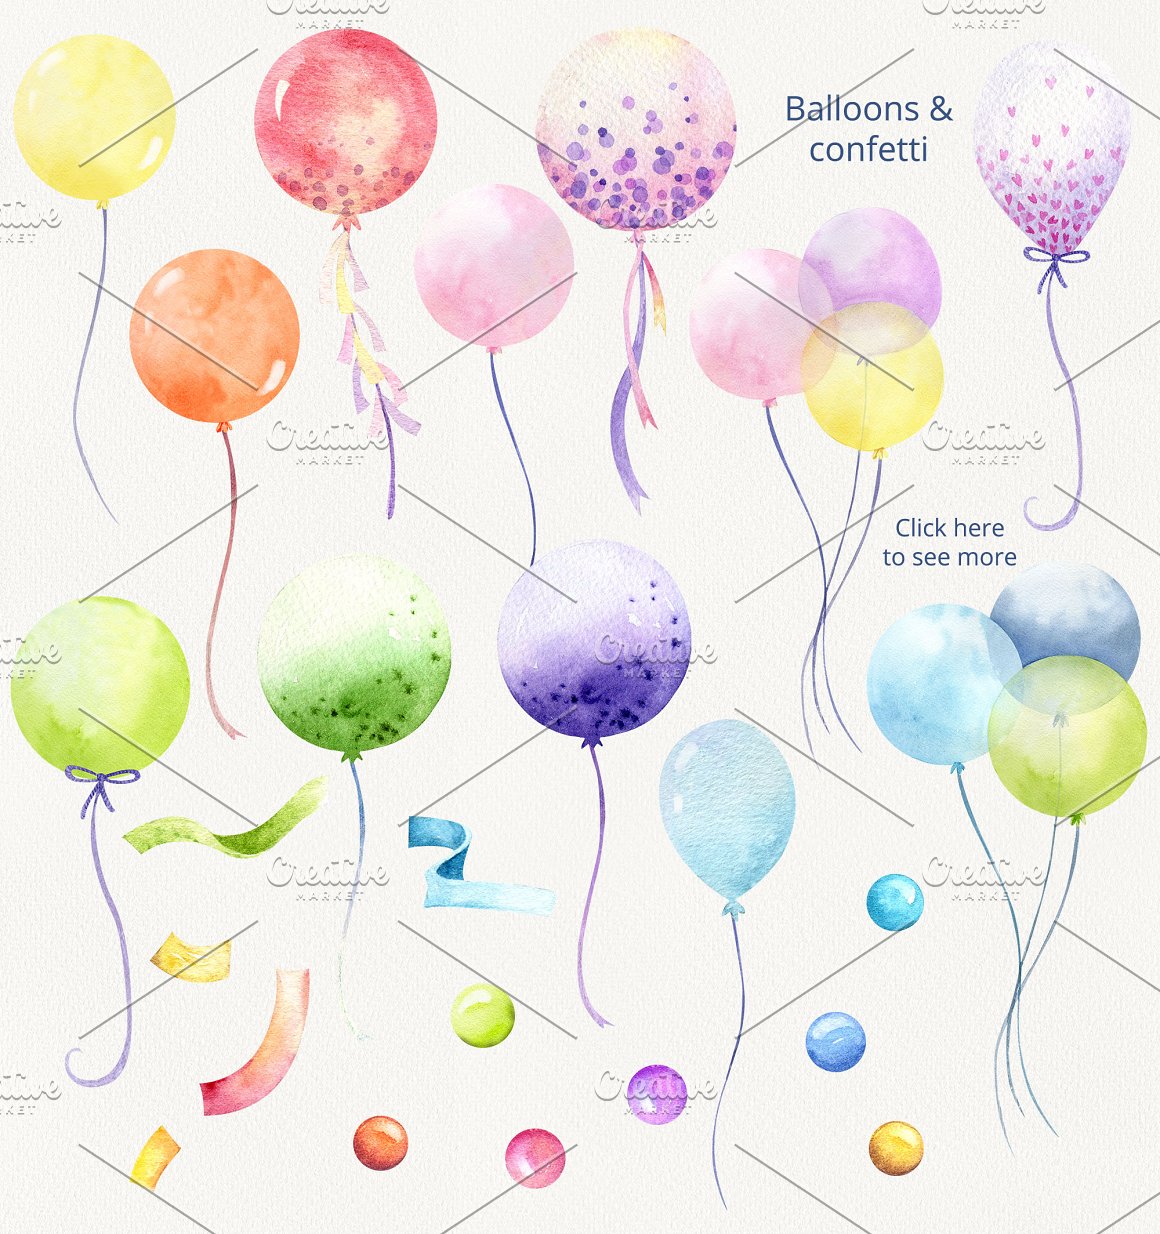 Image with amazing balloons and confetti.